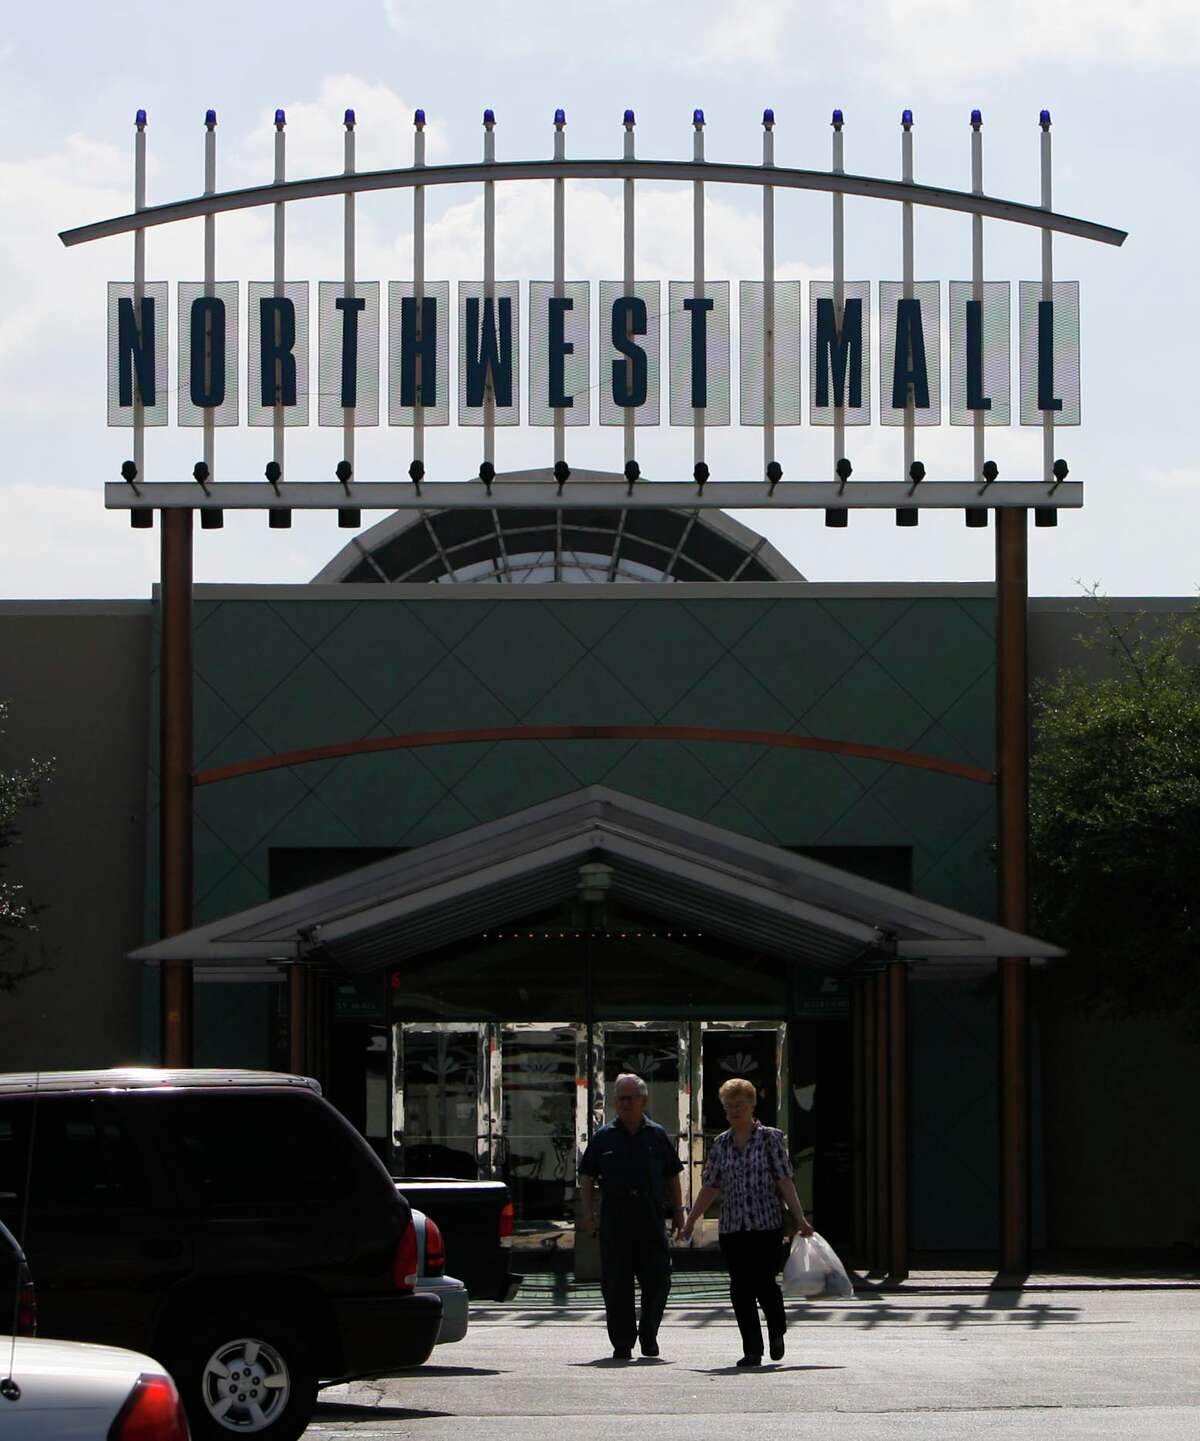 A developer has purchased Northwest Mall shown Thursday, Oct. 4, 2007, in Houston. Larry Levine, a local mall developer, has brought the mall and is considering several options for its development, included mixed-use. ( Melissa Phillip / Chronicle )